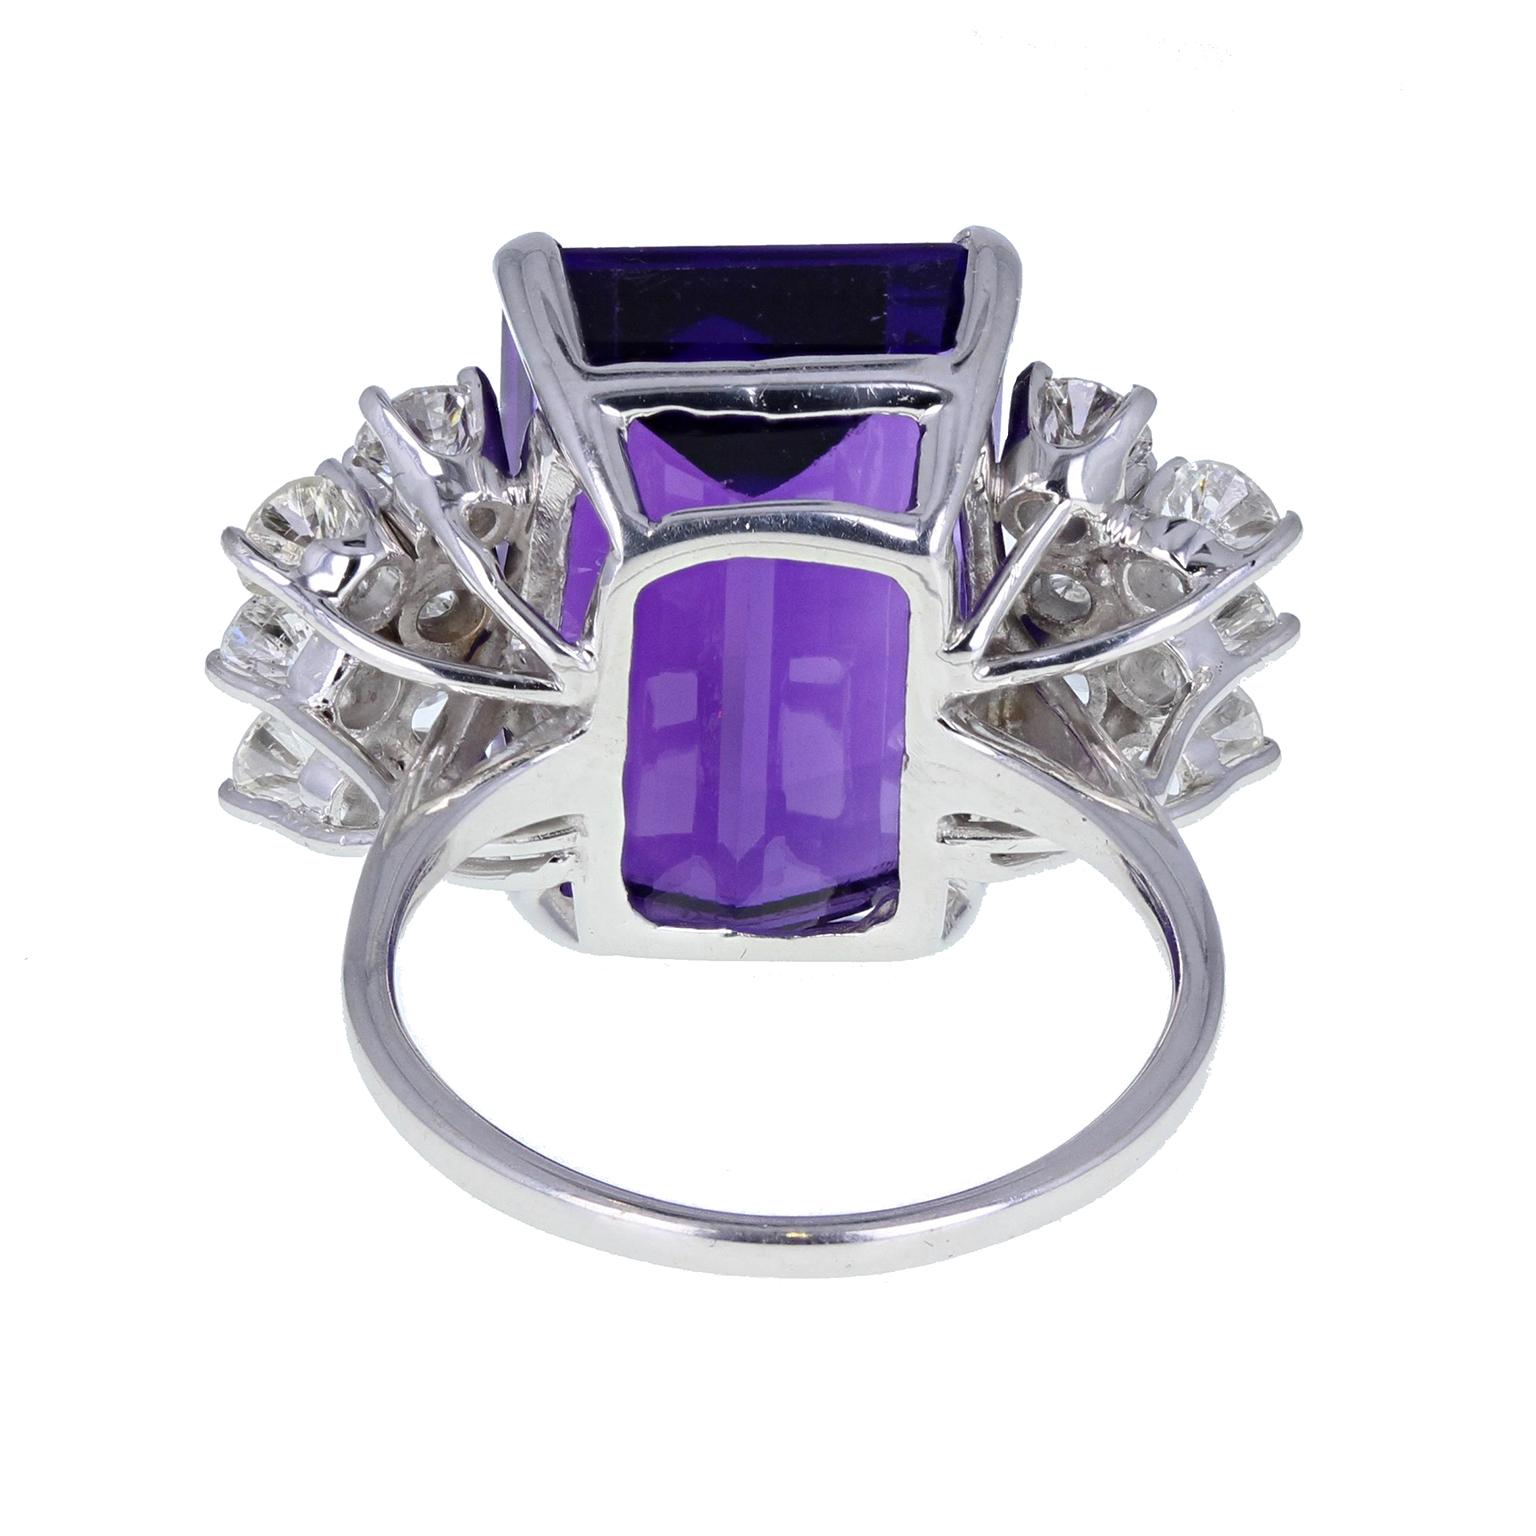 Vintage 18 Carat White Gold Amethyst Diamond Cocktail Ring In Excellent Condition For Sale In Newcastle Upon Tyne, GB